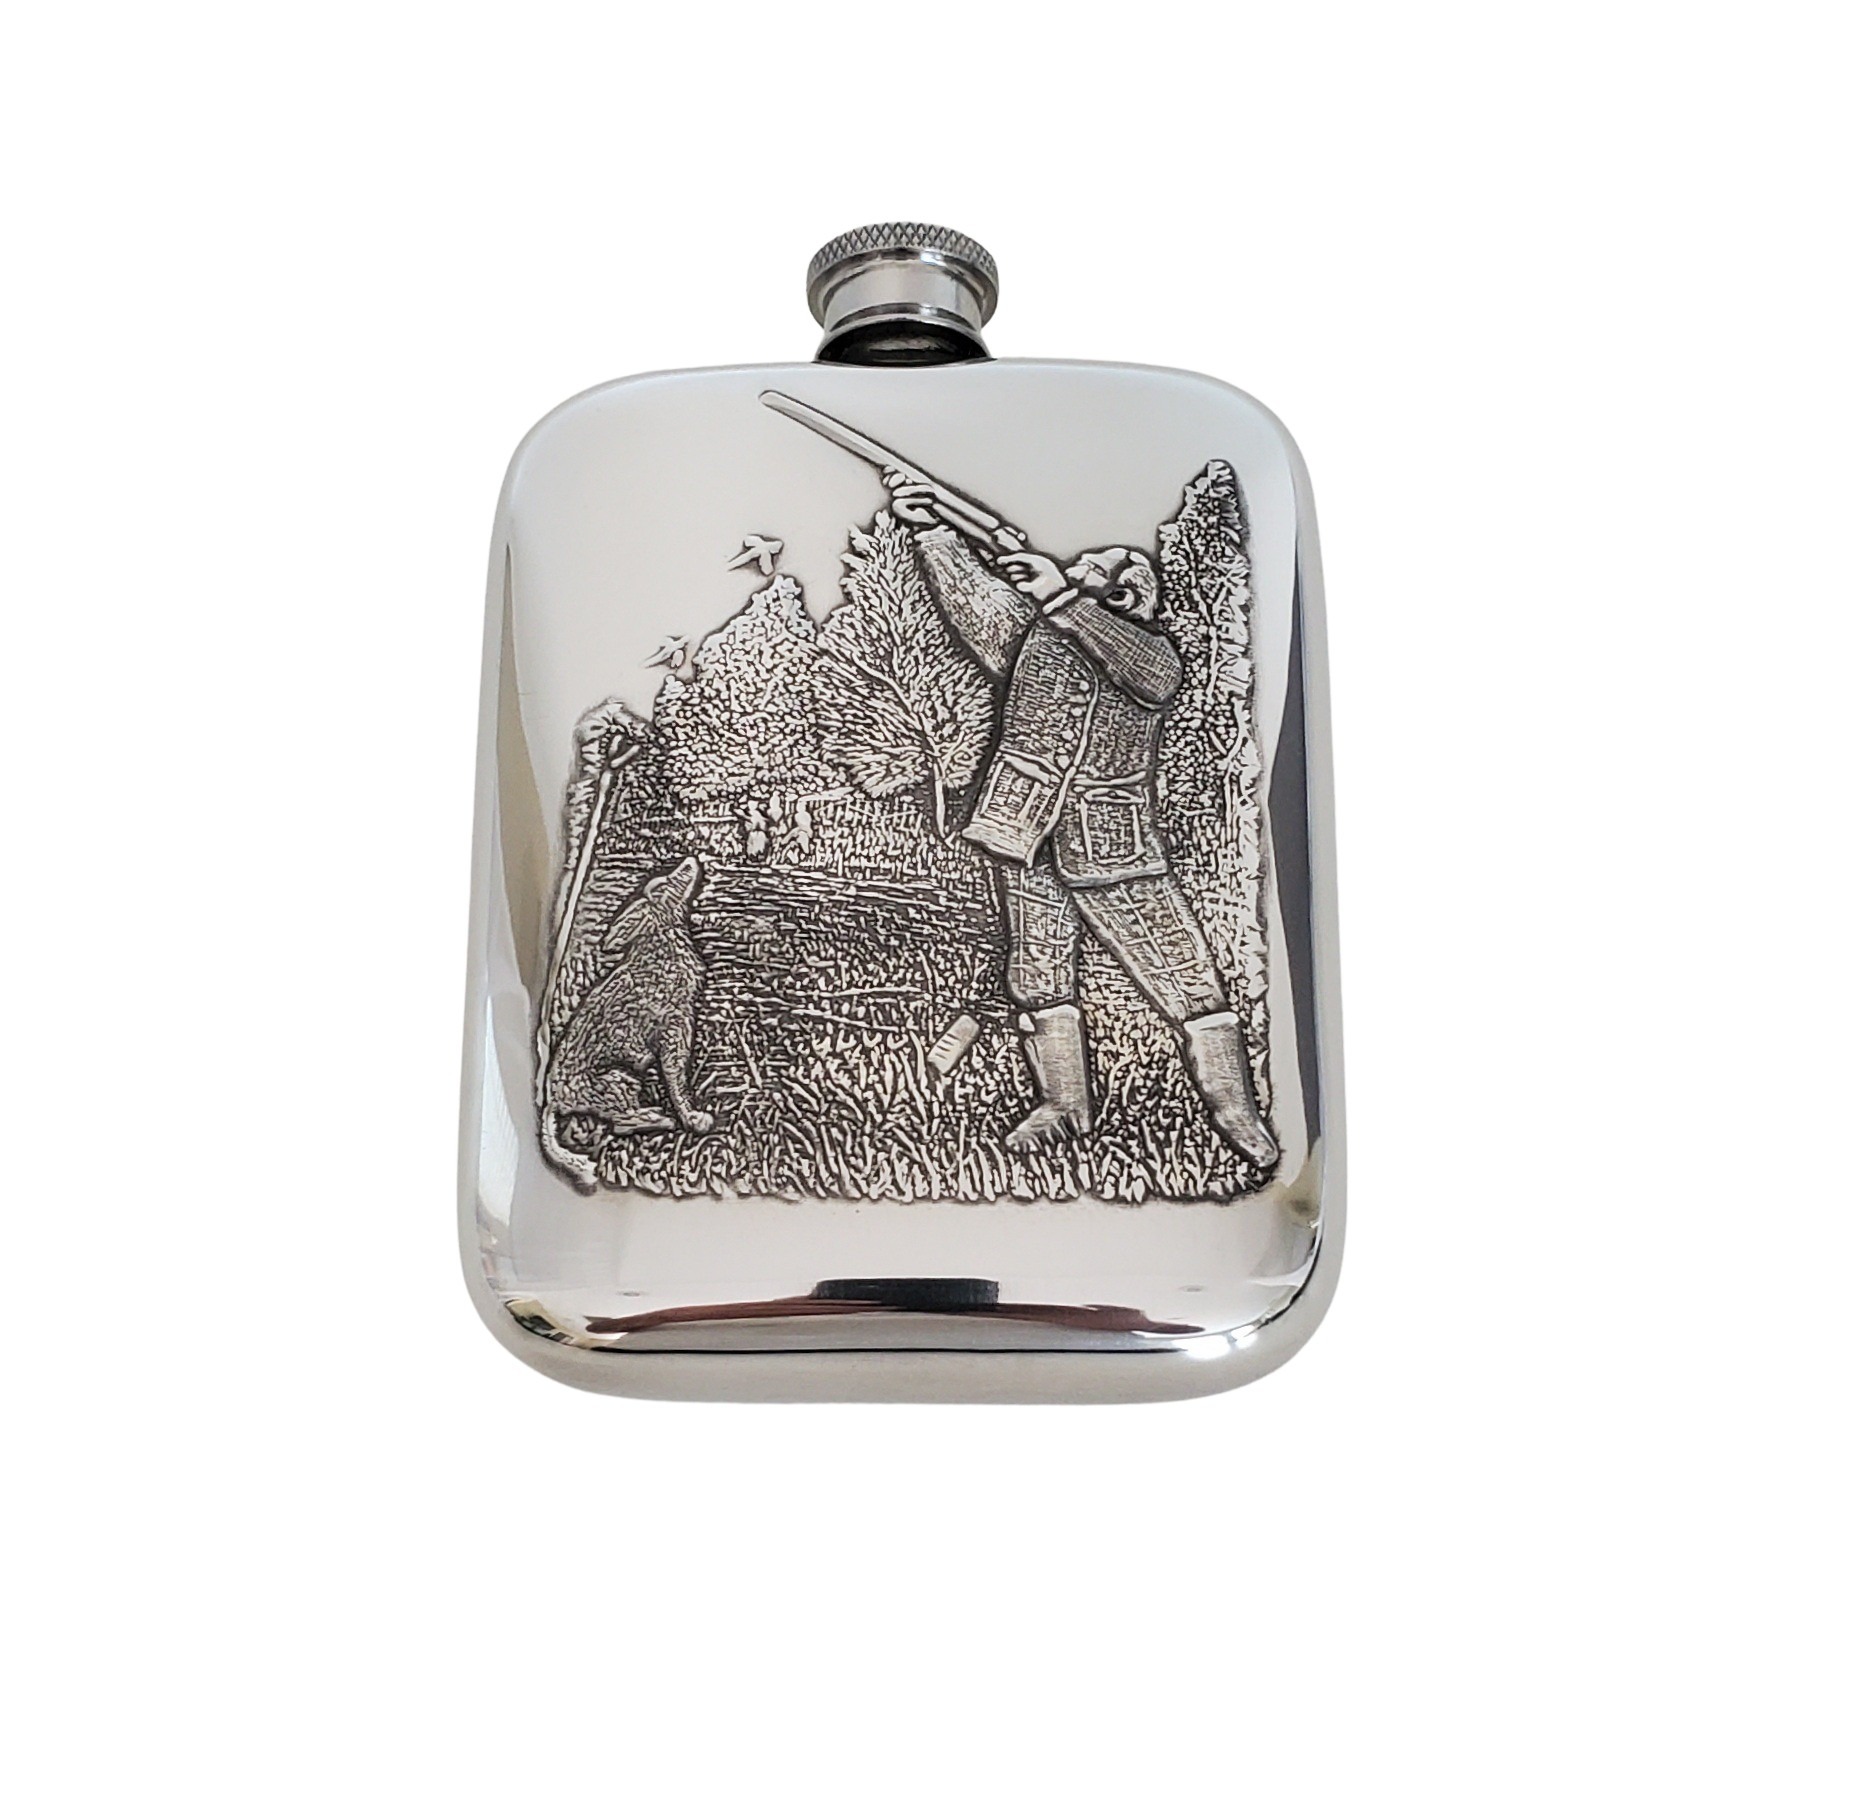 6oz Stainless Steel Hip Flask With Pewter Fishing Trout Emblem -  UK-englishpewter